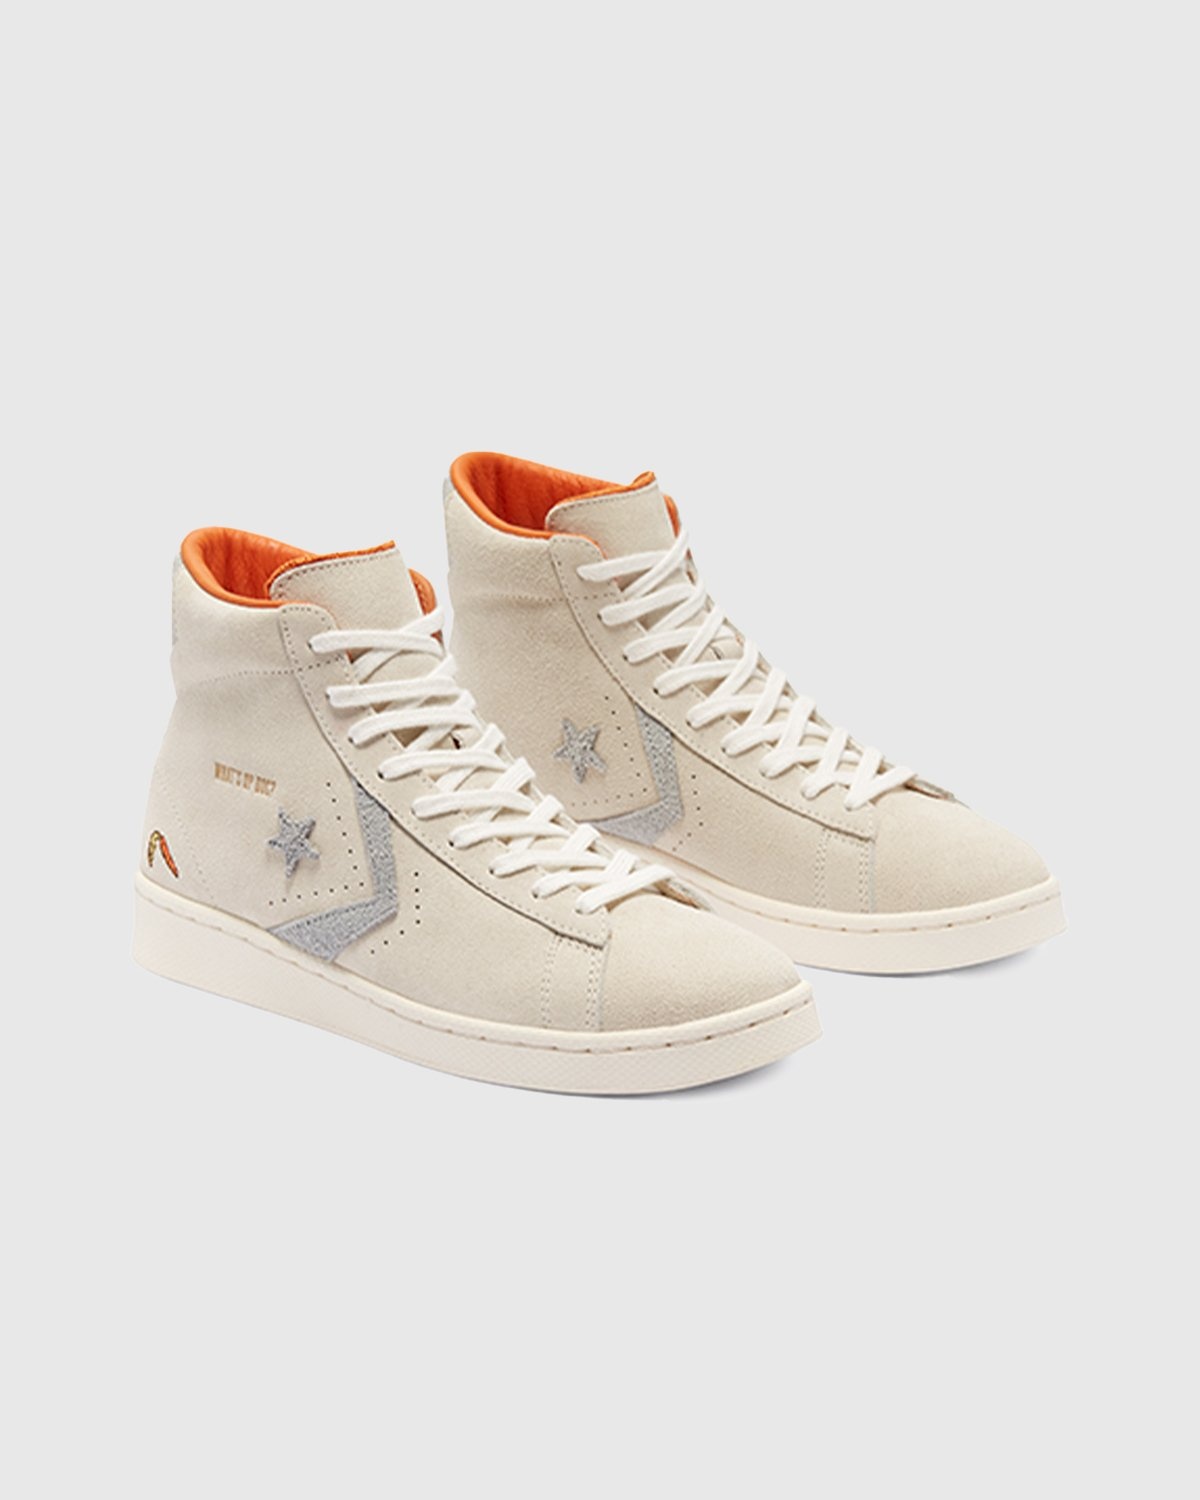 Converse – Bugs Bunny 80th Pro Leather High Natural Ivory - High Top Sneakers - Beige - Image 2